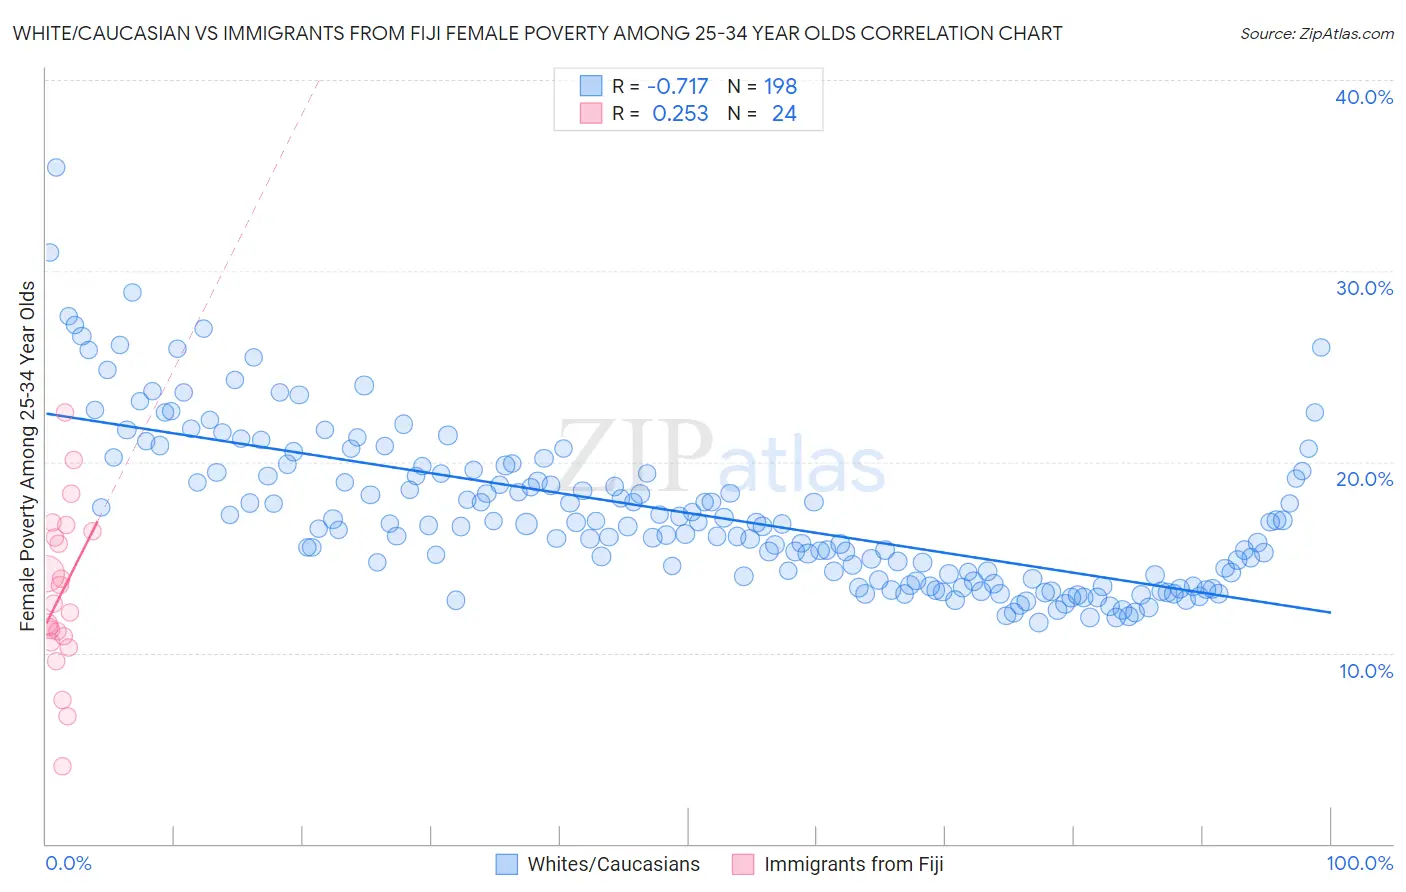 White/Caucasian vs Immigrants from Fiji Female Poverty Among 25-34 Year Olds